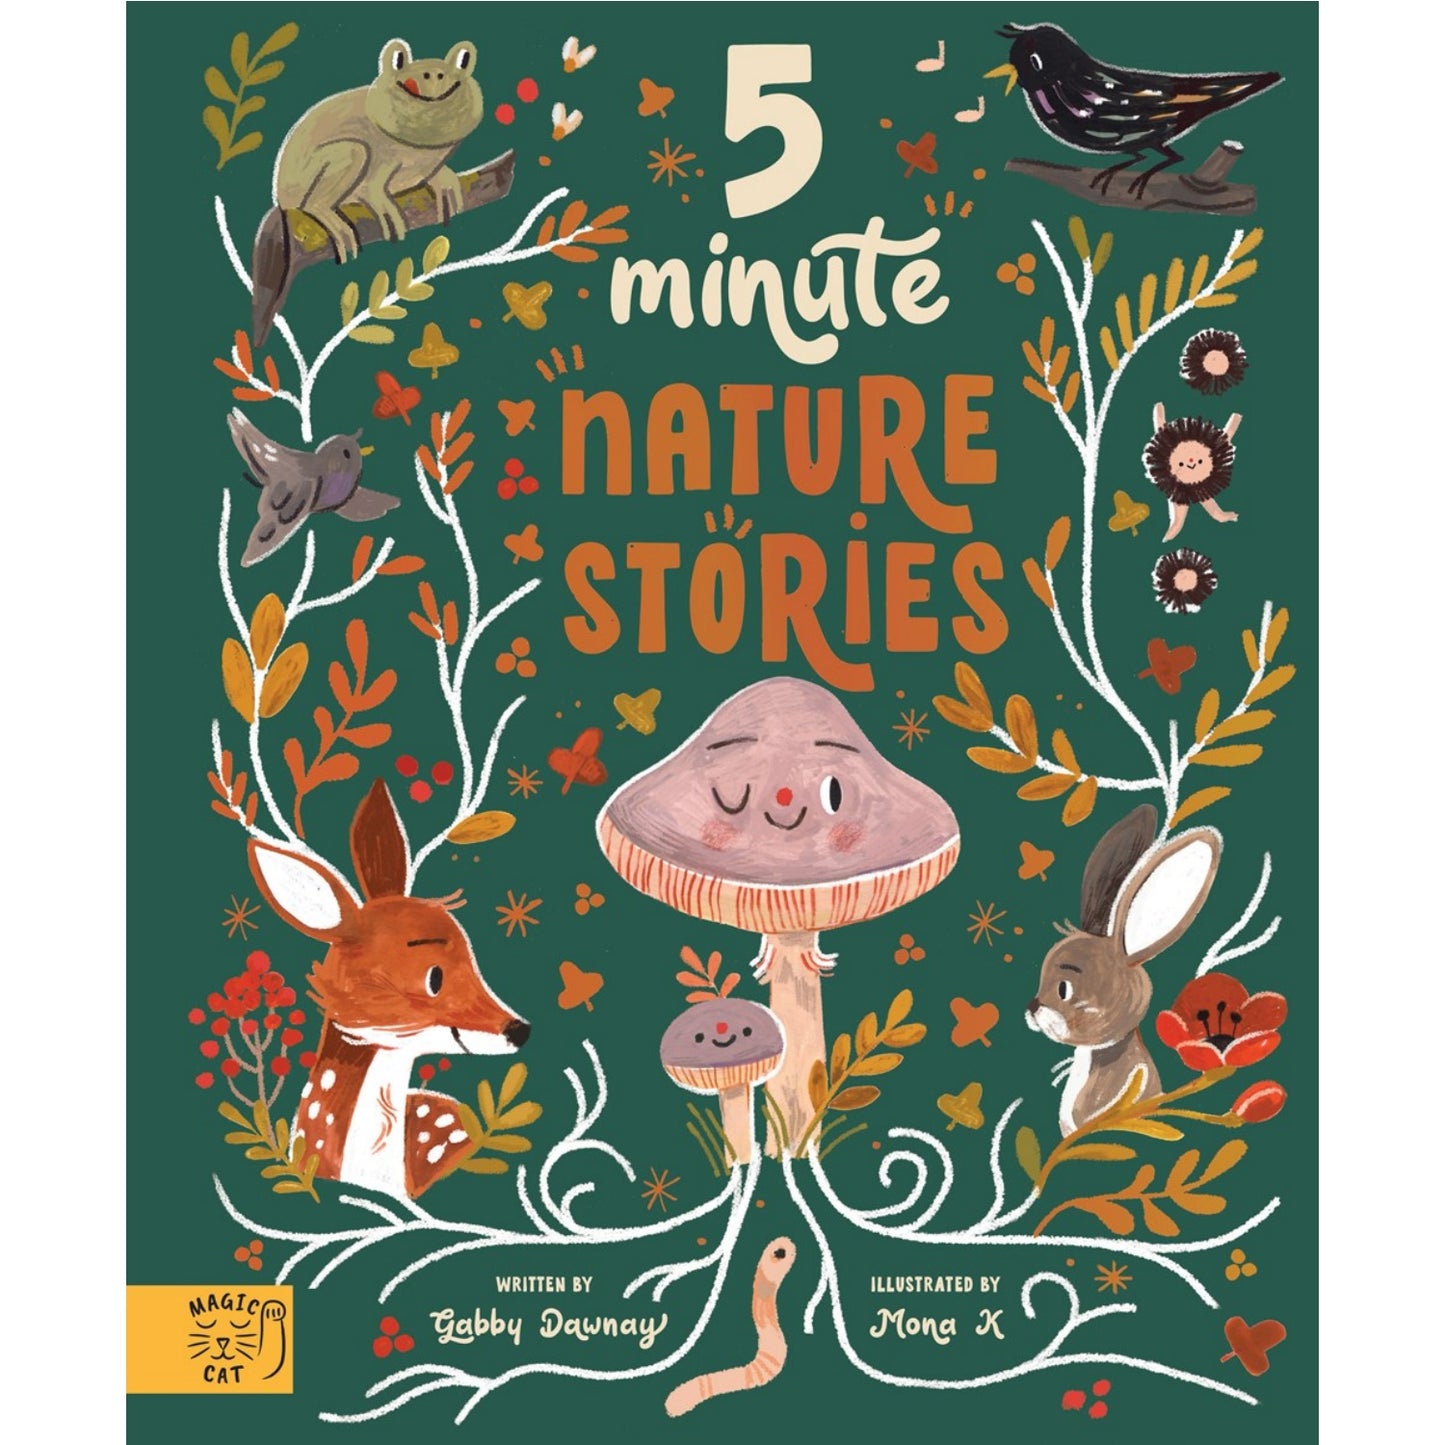 5 Minute Nature Stories: True tales from the Woodland | Children's Books on Nature